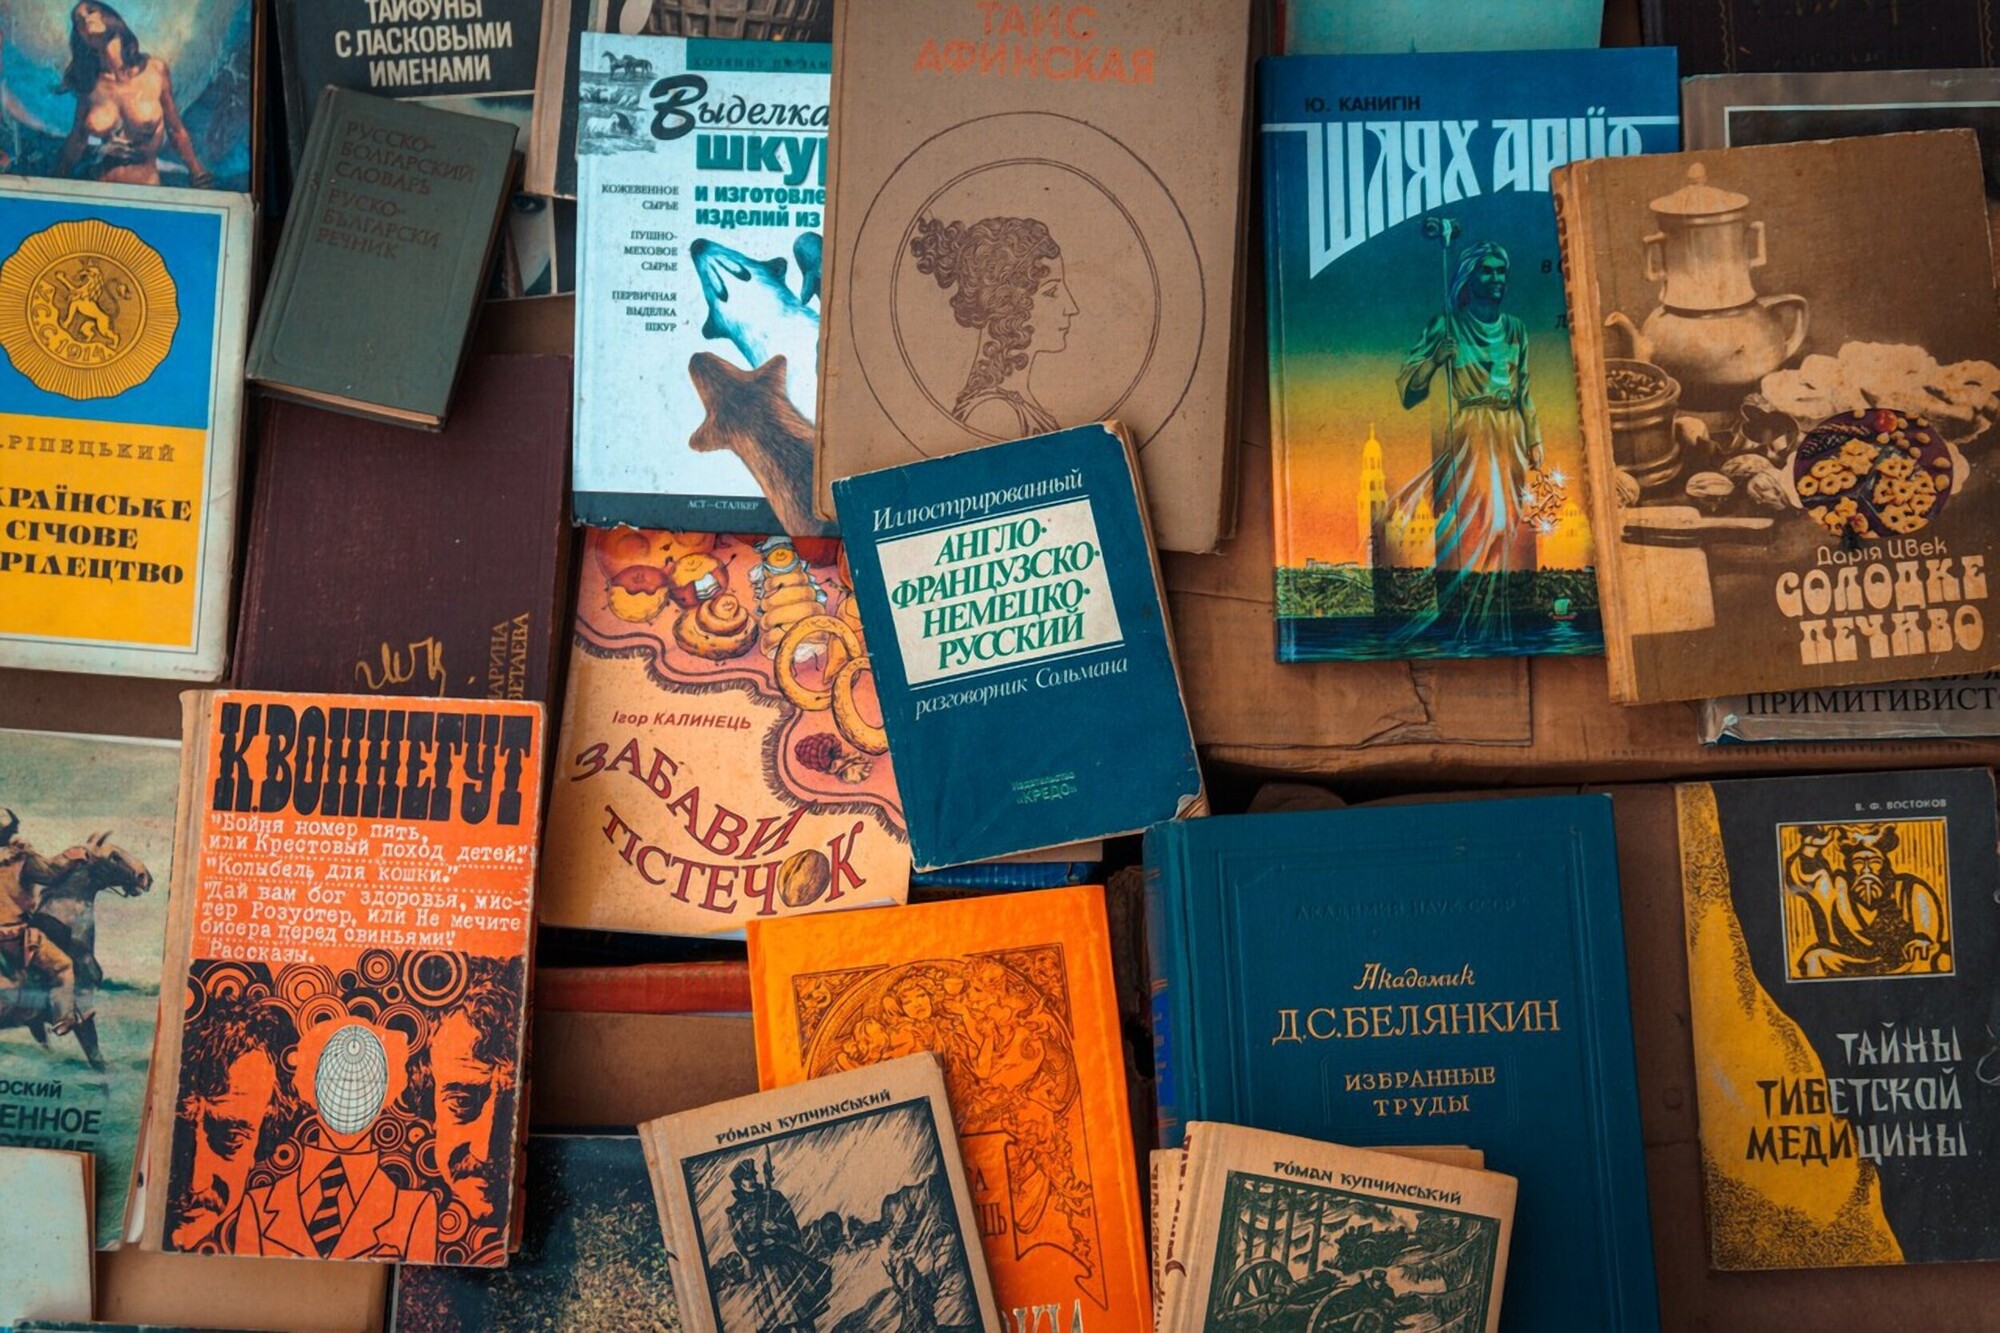 10 Beautiful Travel Books to Add to Your Collection